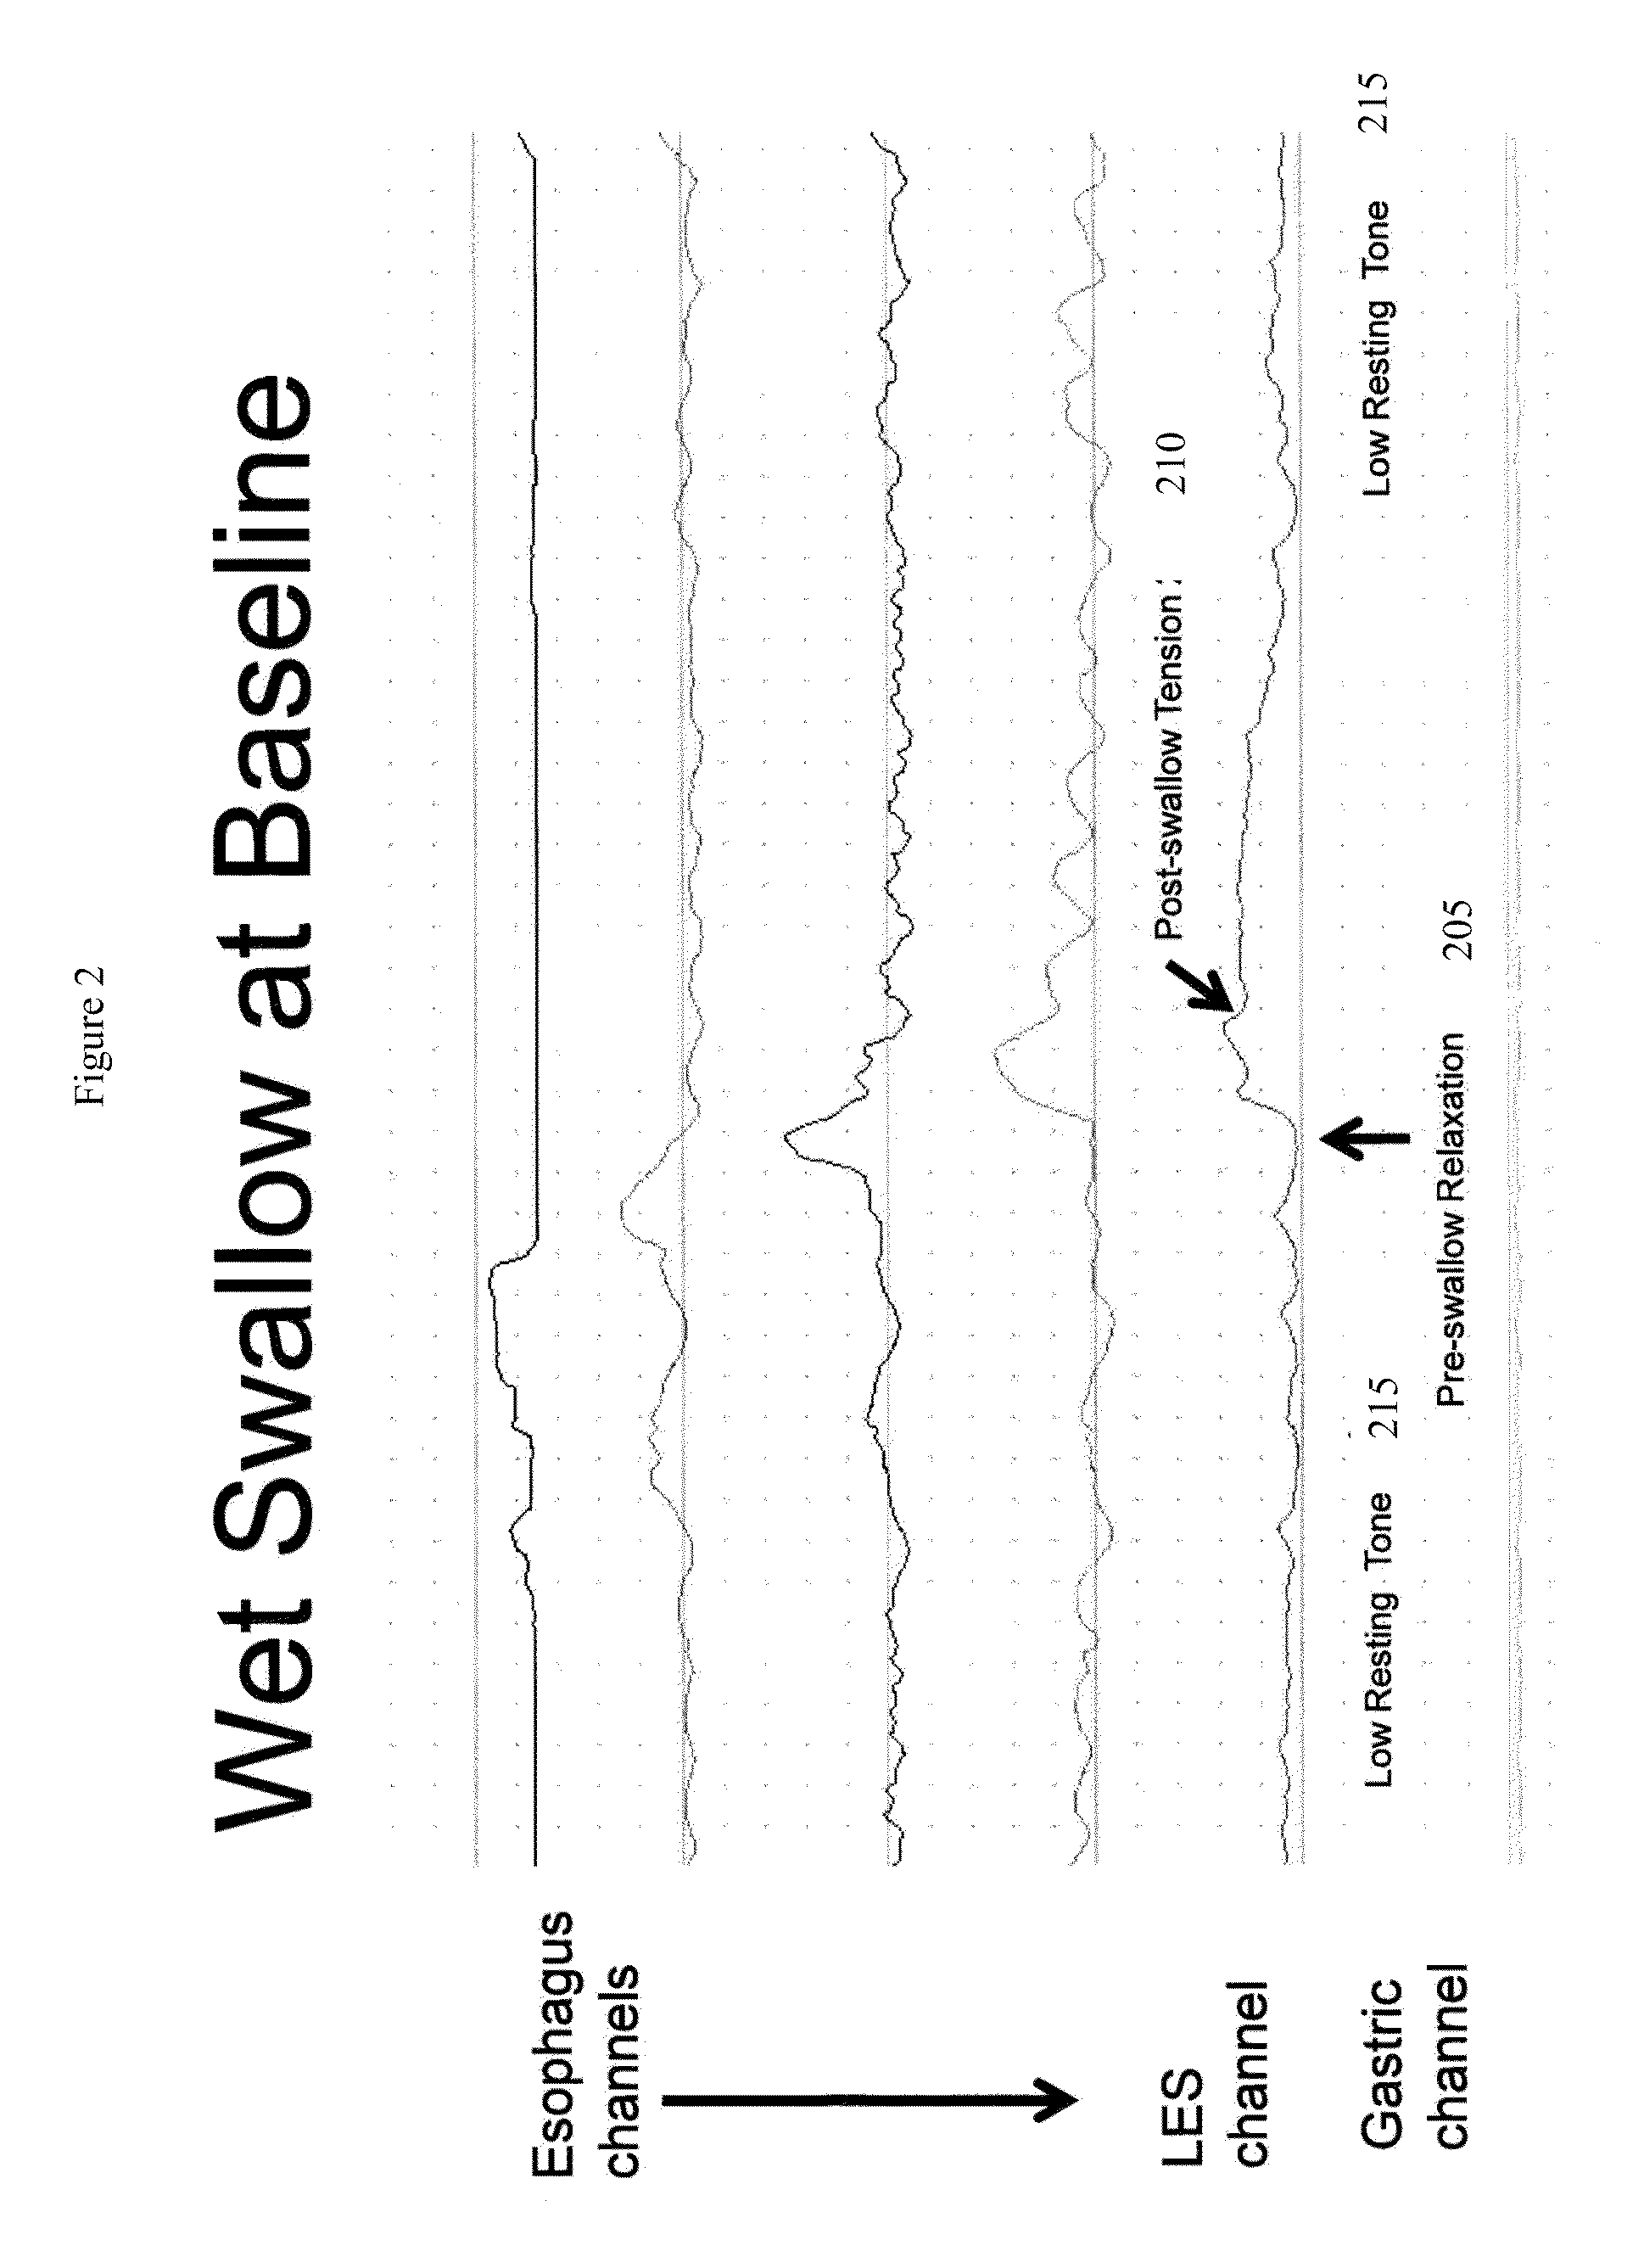 Device and implantation system for electrical stimulation of biological systems